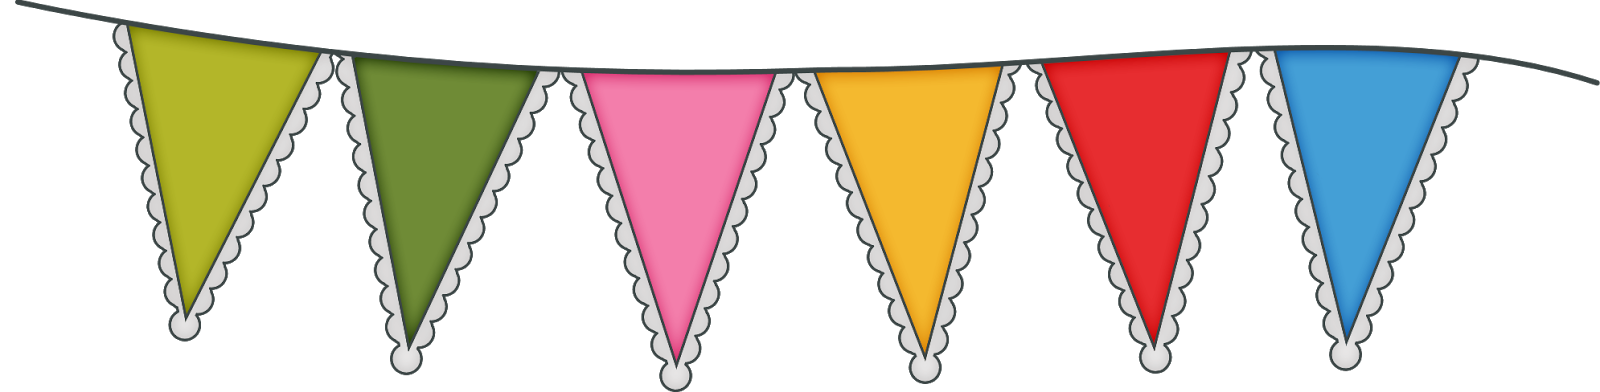 fiesta clipart colourful bunting